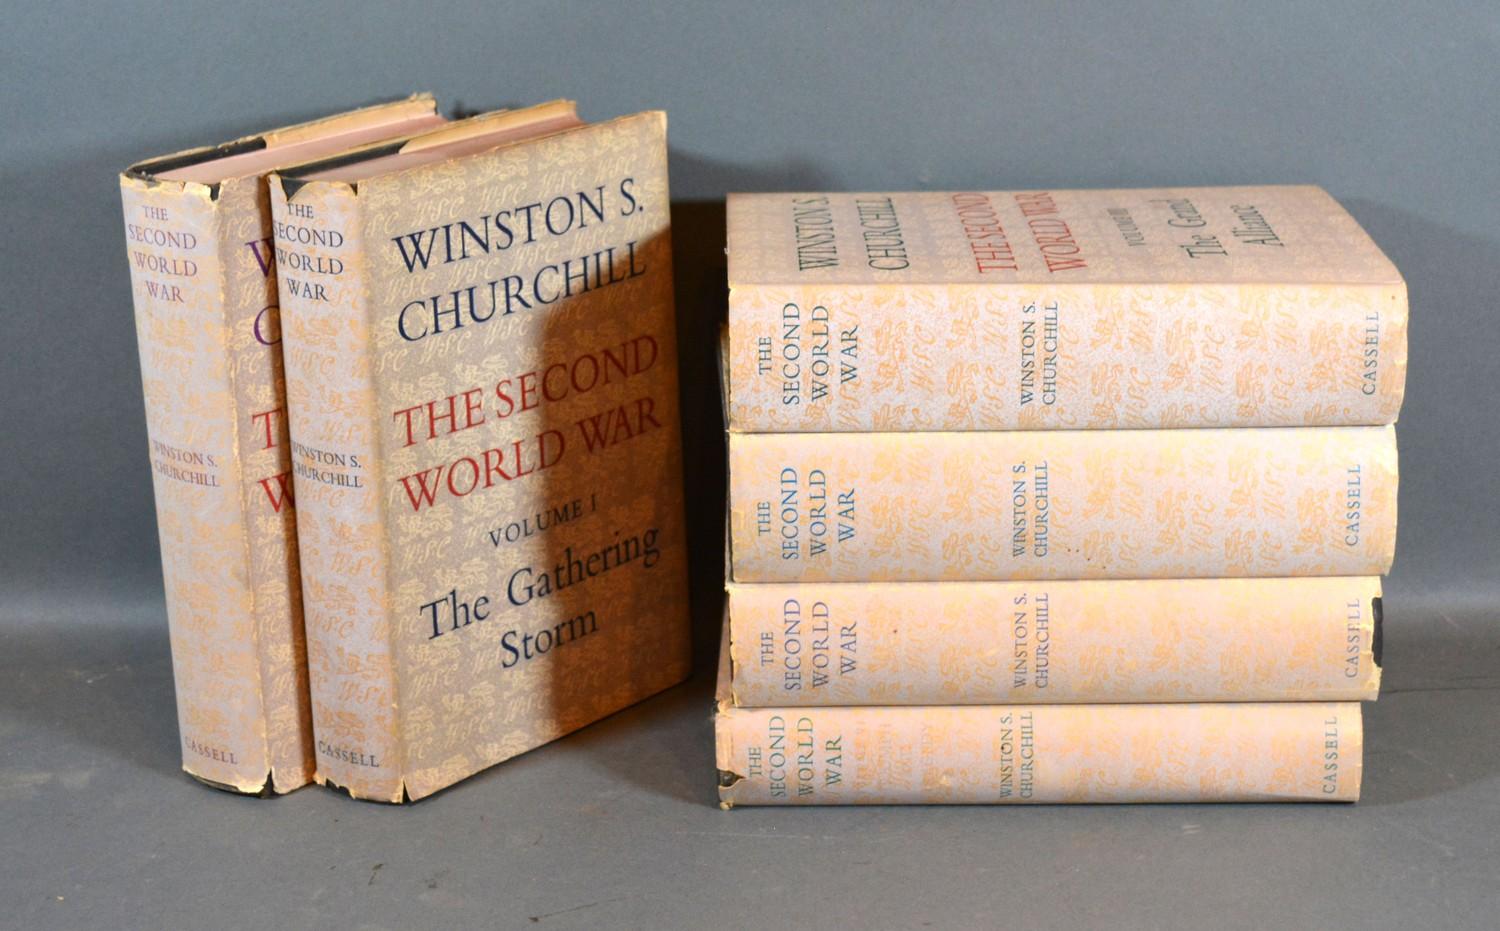 Six Volumes The Second World War, Winston S Churchill, published by Cassell, first editions